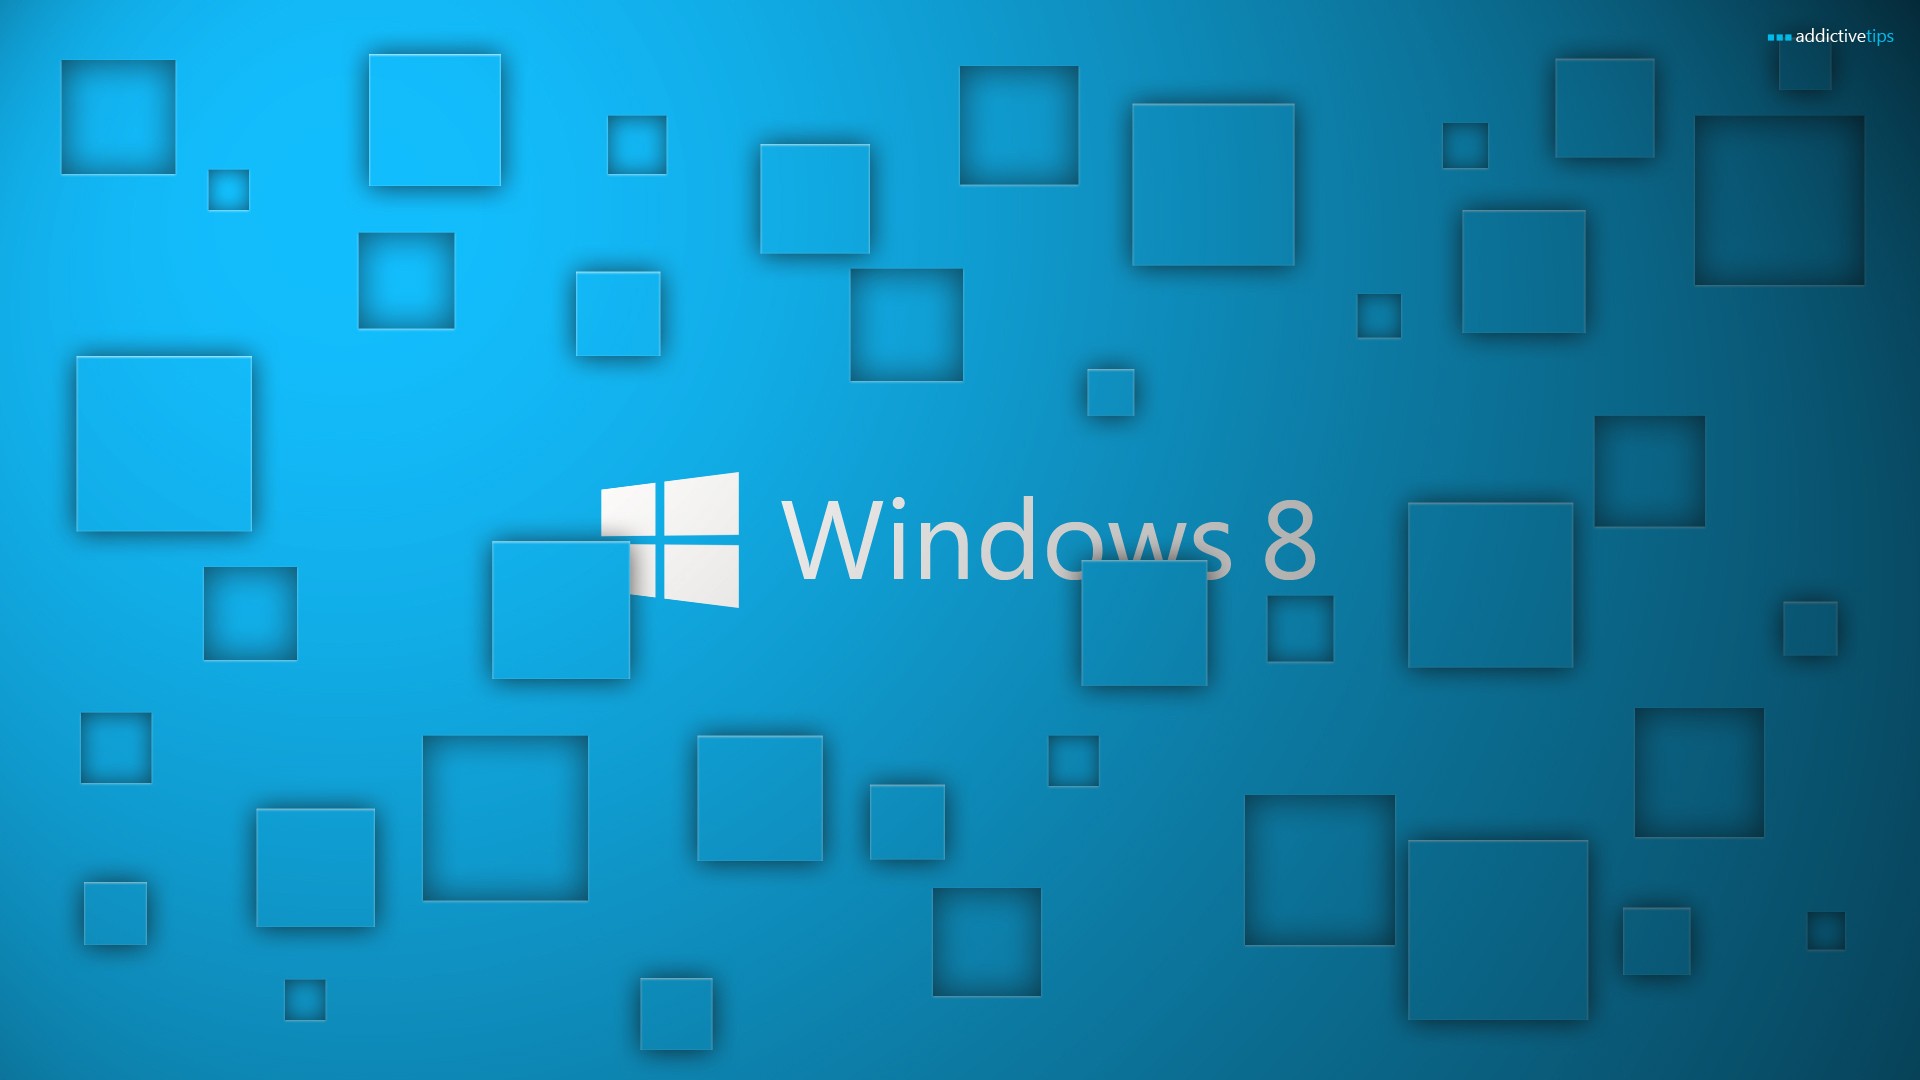 The Official Windows Wallpaper Taken From Build M3